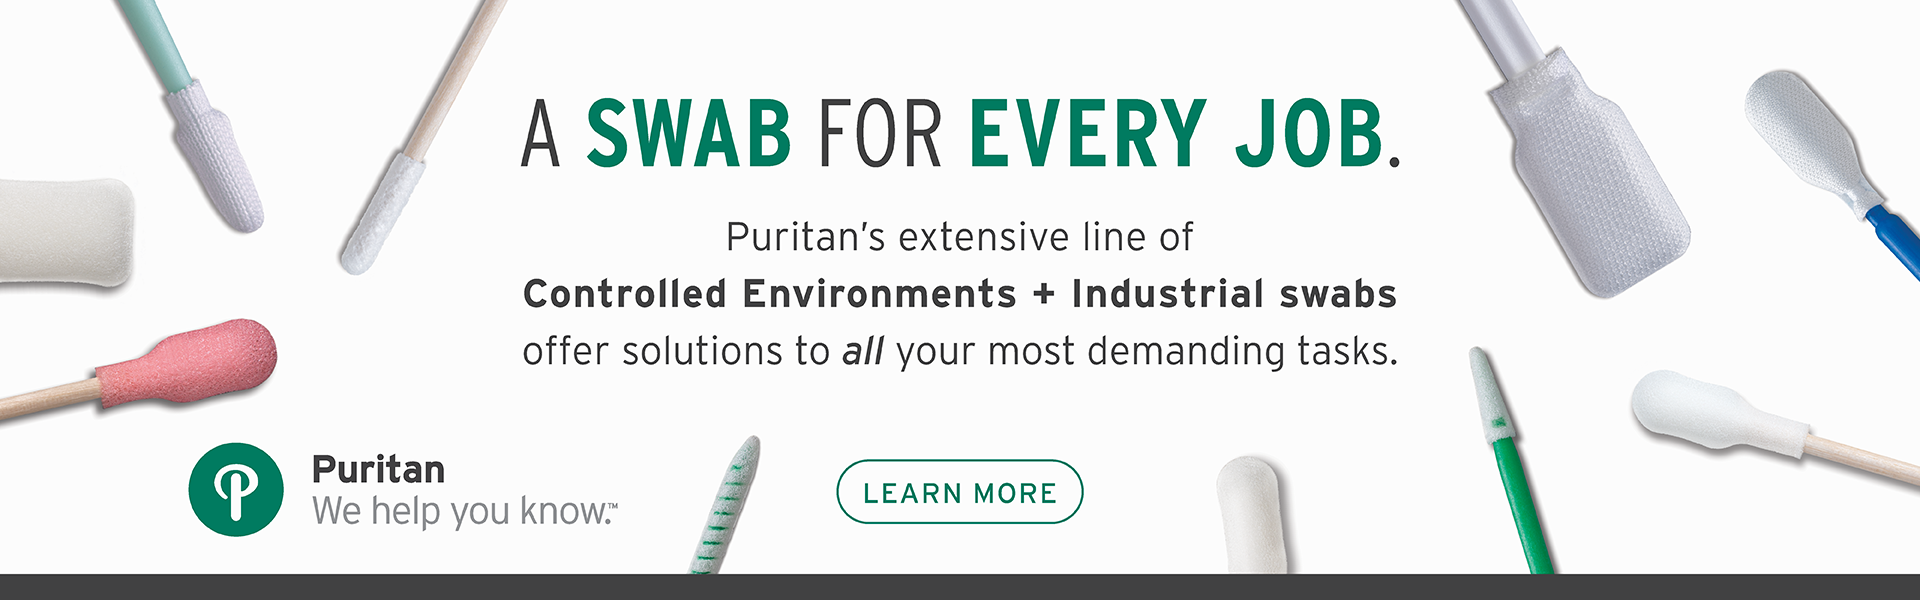 A Swab for Every Job - Industrial and Controlled Environment Swabs